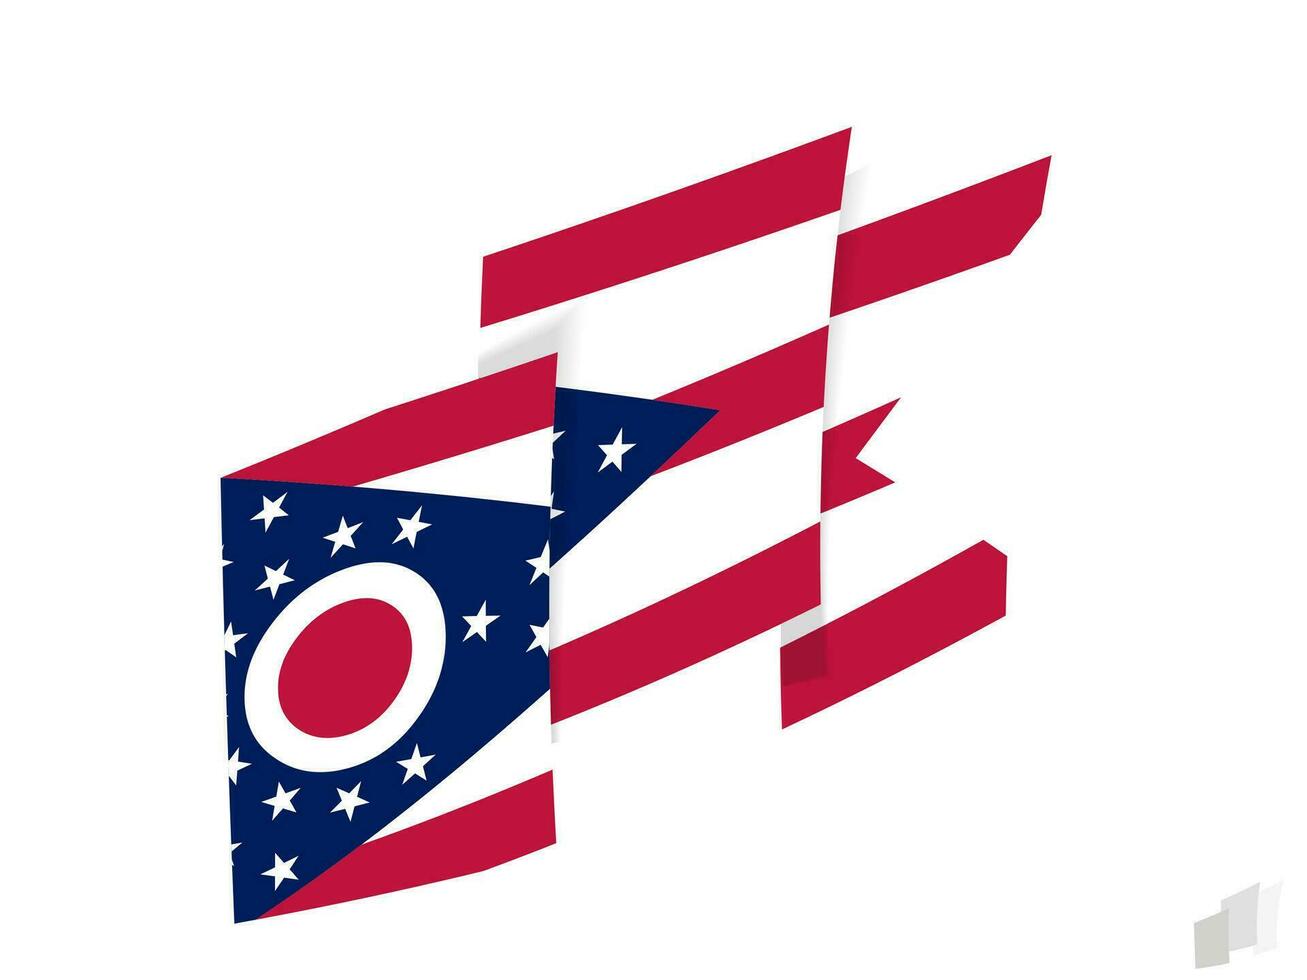 Ohio flag in an abstract ripped design. Modern design of the Ohio flag. vector